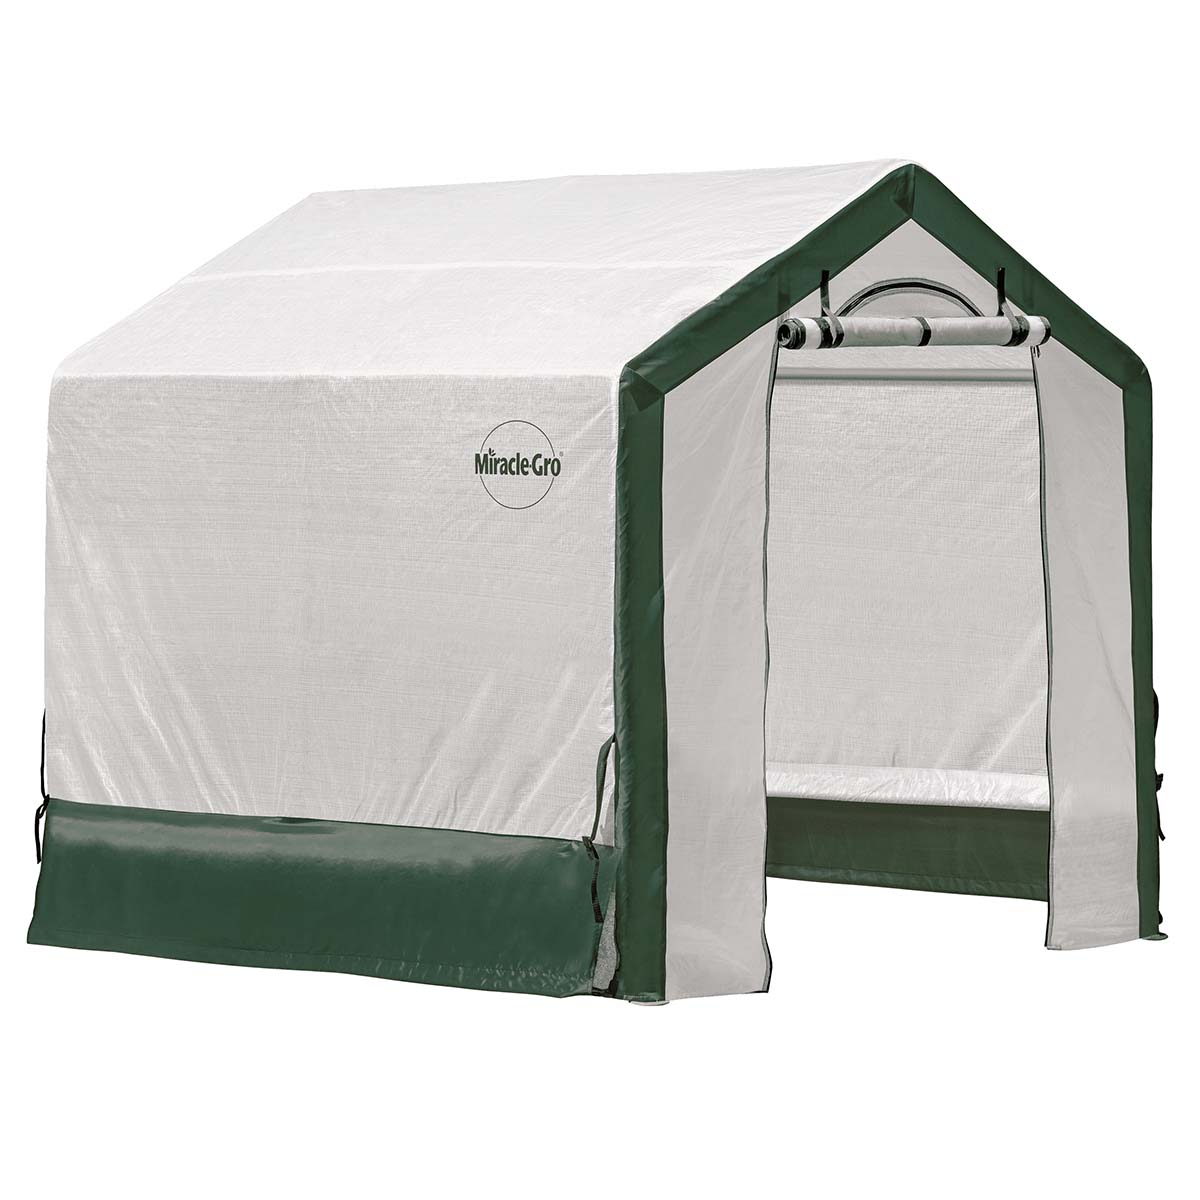 Miracle-Gro Greenhouse 6 x 6 x 6-ft